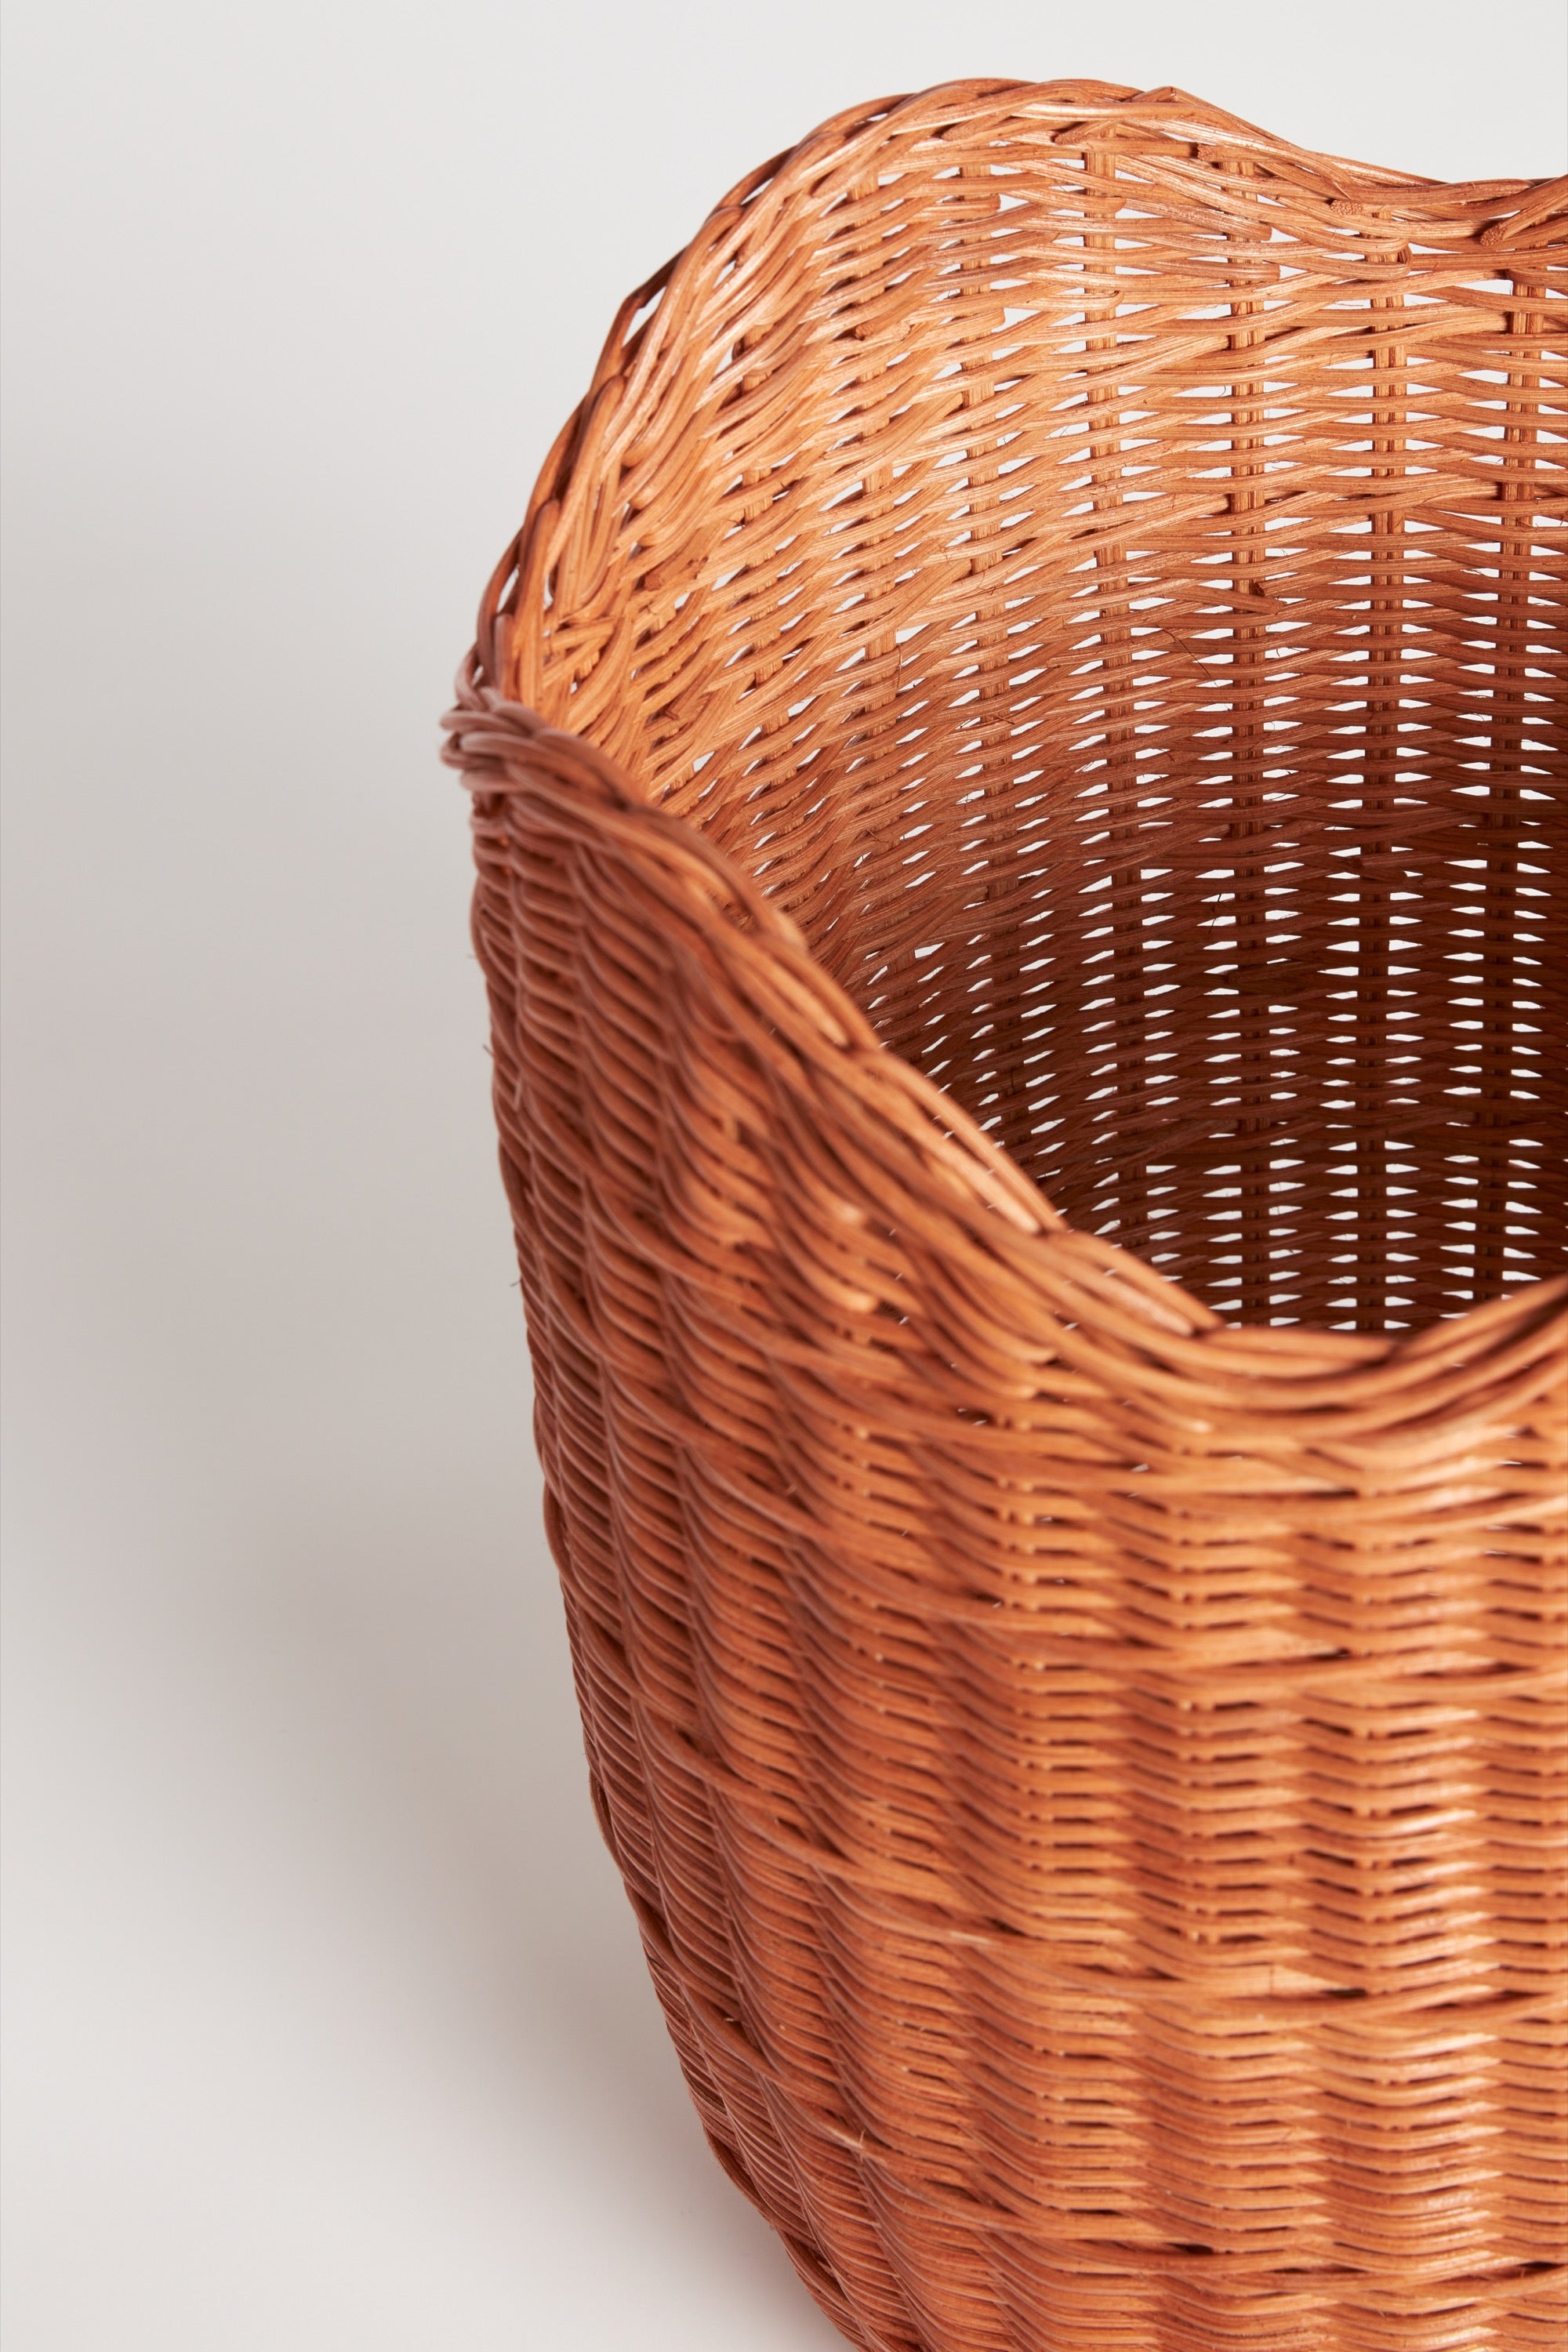 The Wave Basket in Tan